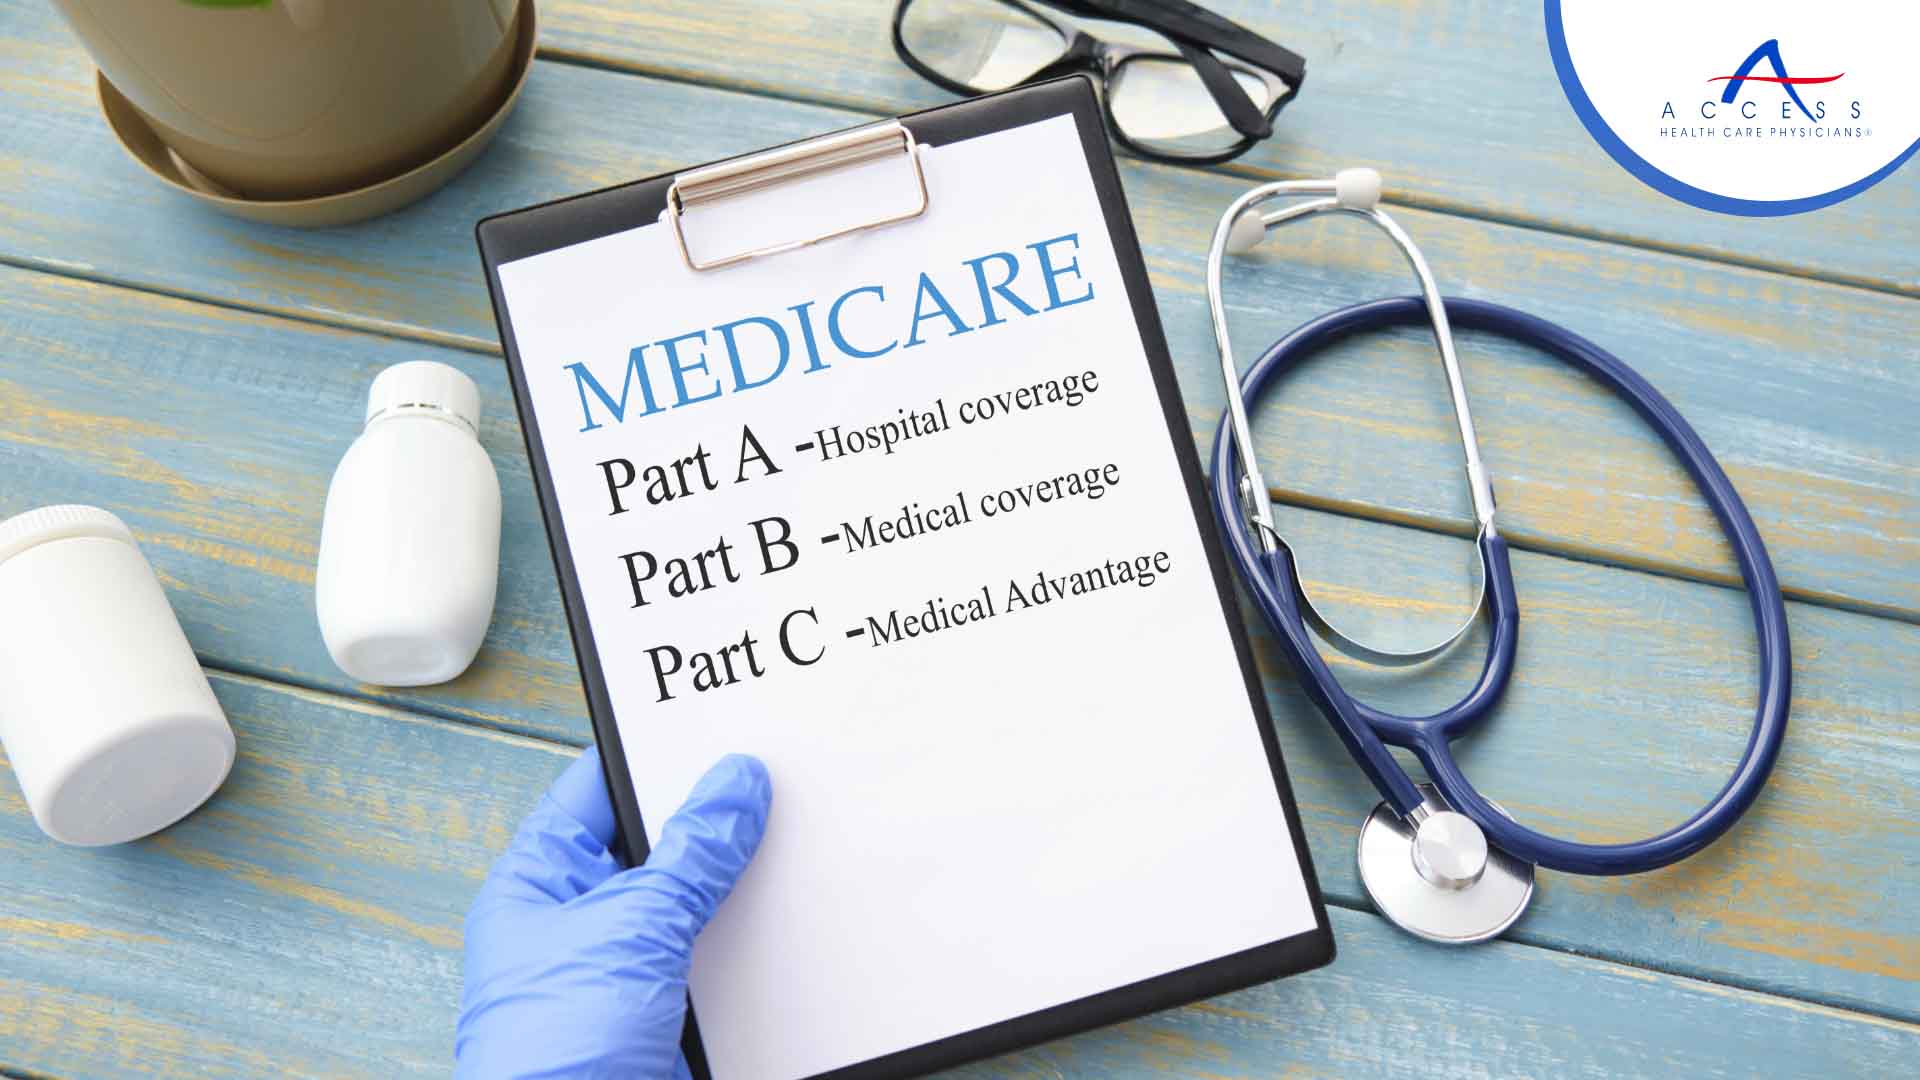 Difference between OEP and AEP - Access Health Care Physicians, LLC - AtoAllinks